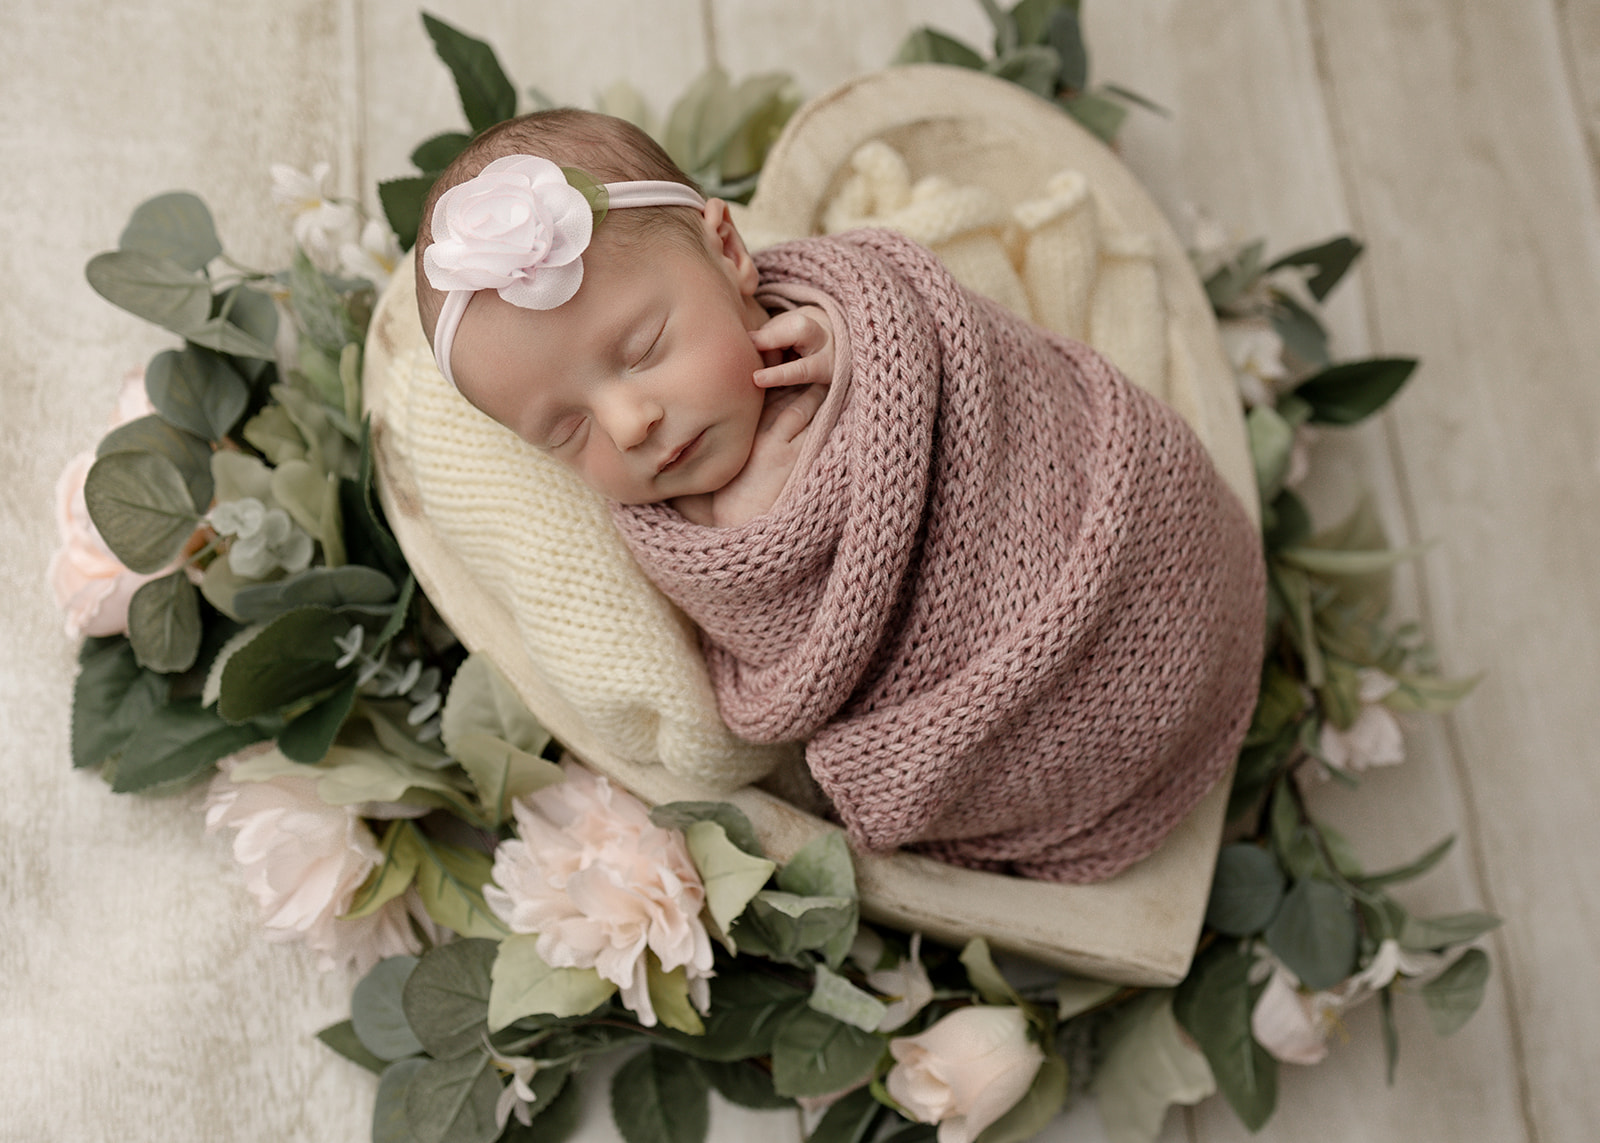 A newborn baby sleeps on a bed of roses in a heart-shaped bowl and pink knit swaddle Huntington Beach Pediatricians